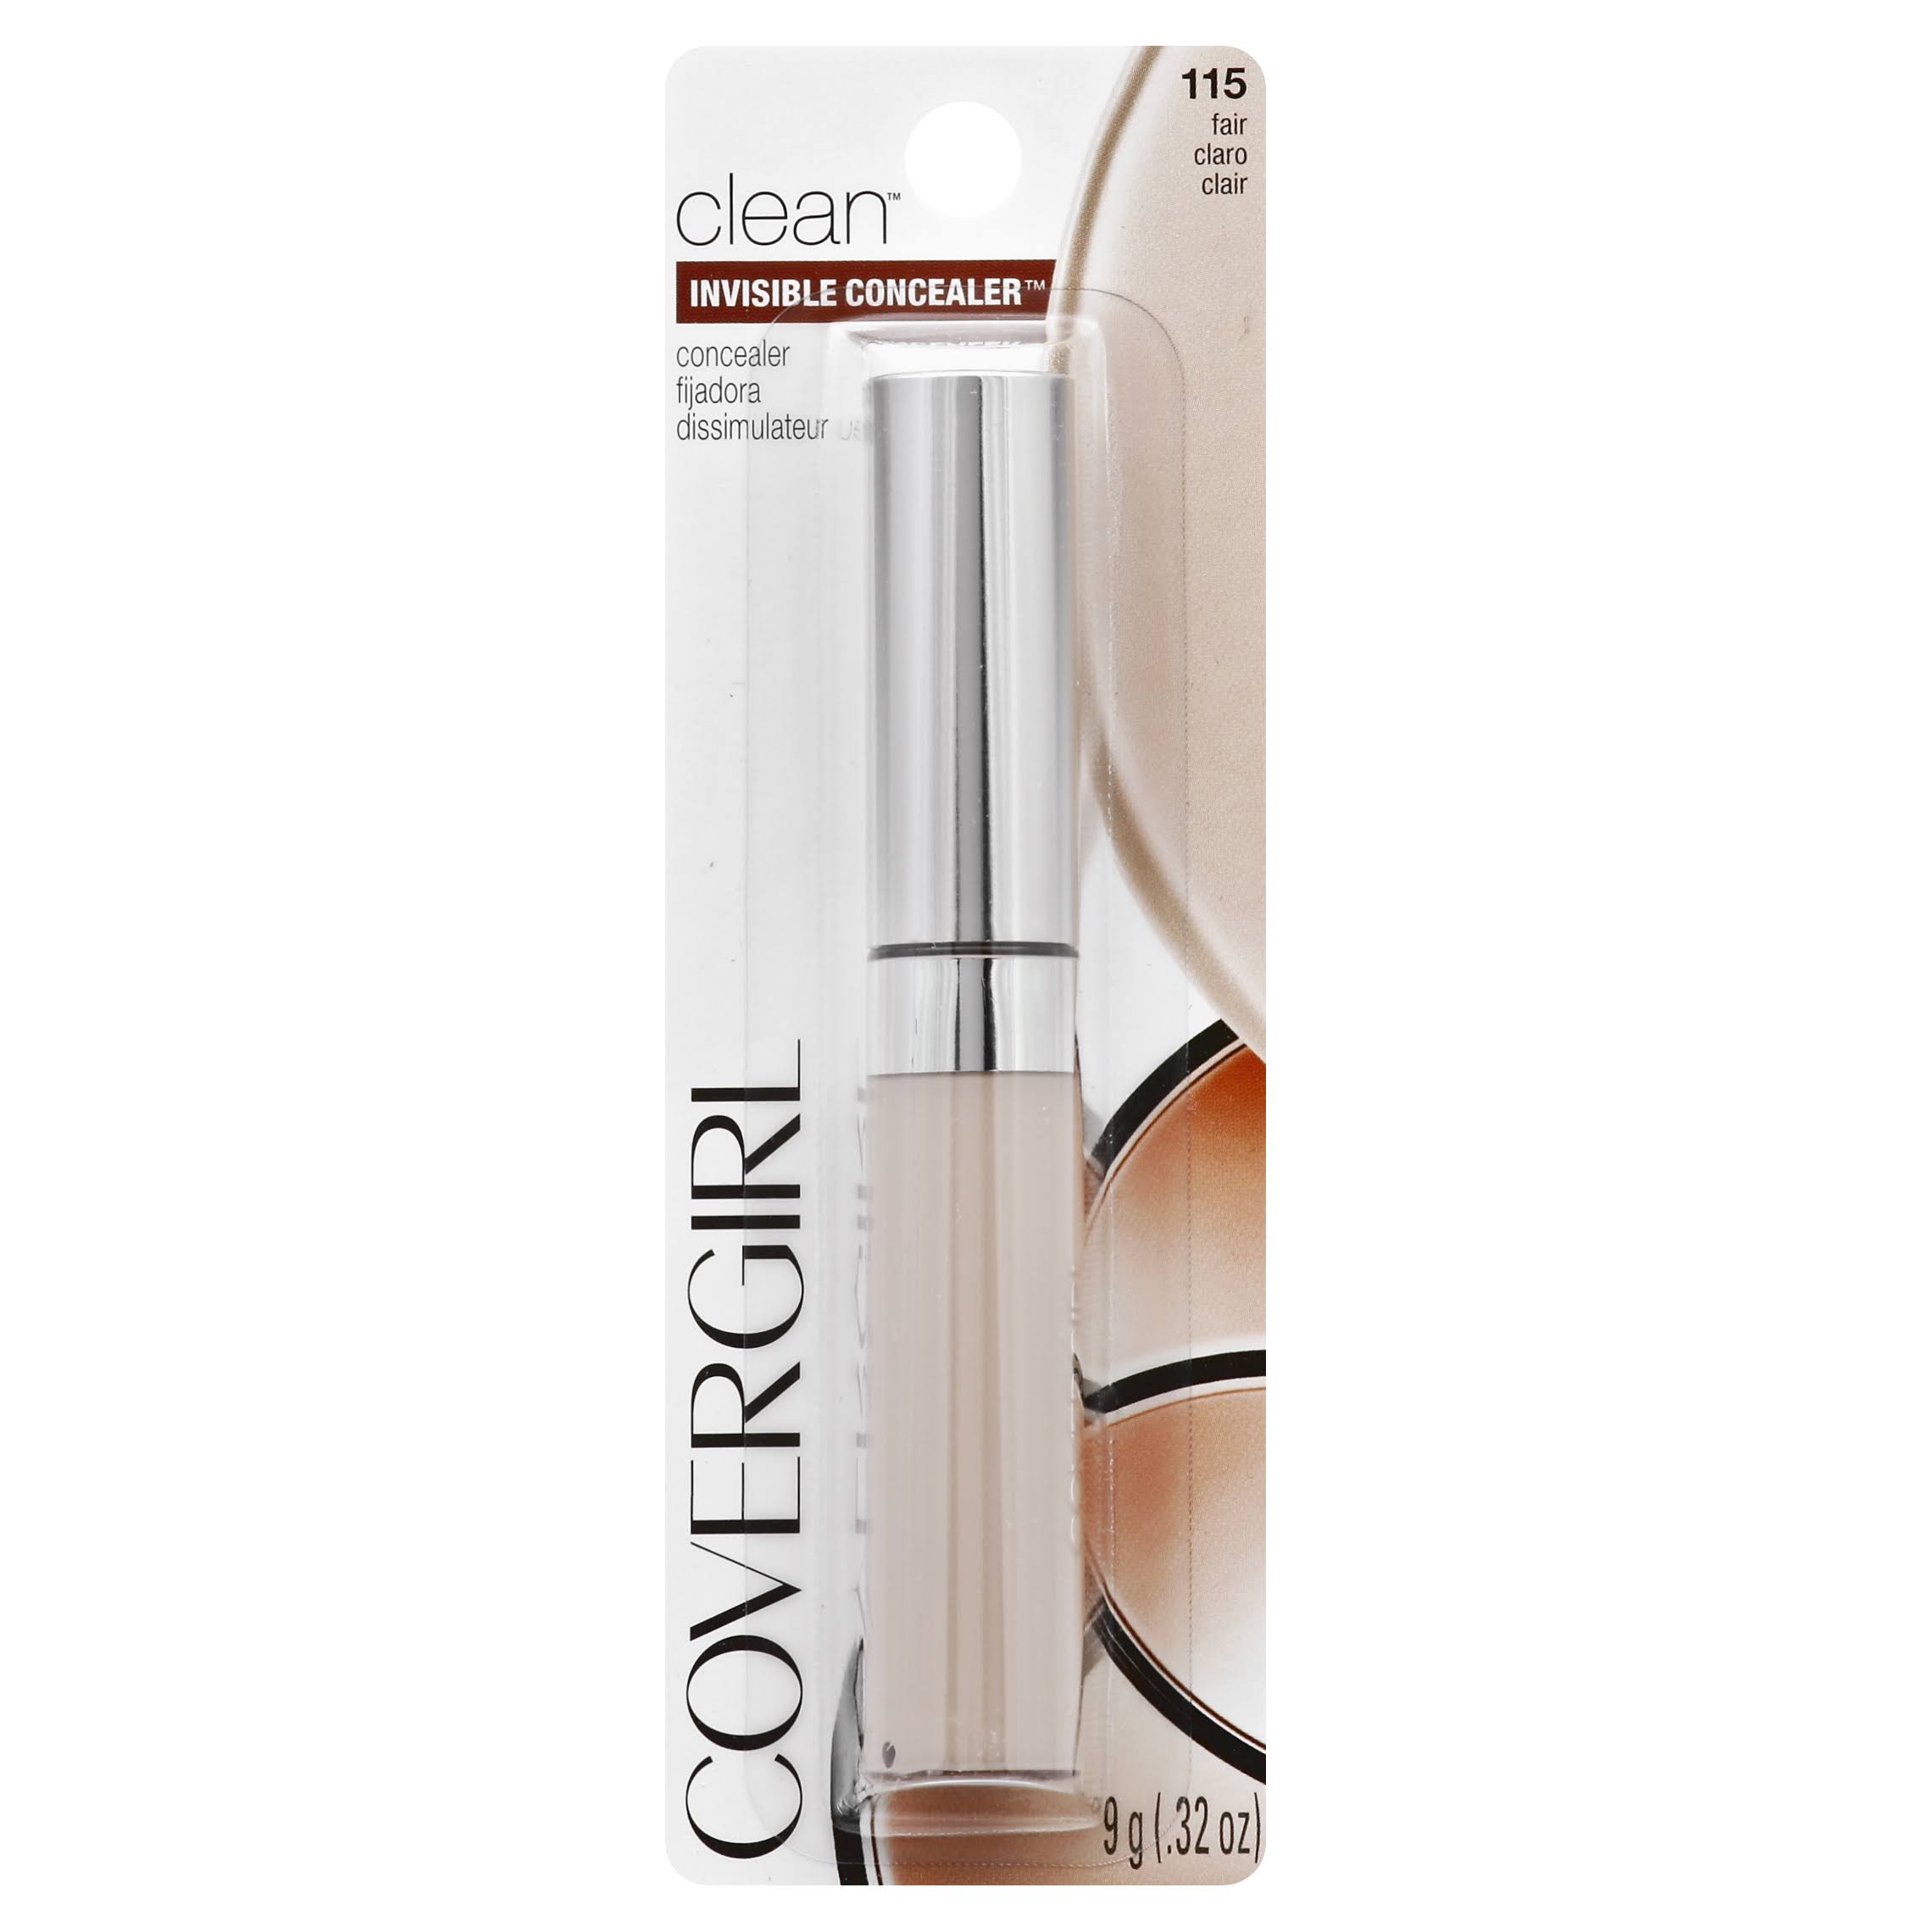 Covergirl Clean Invisible Concealer - 115 Fair